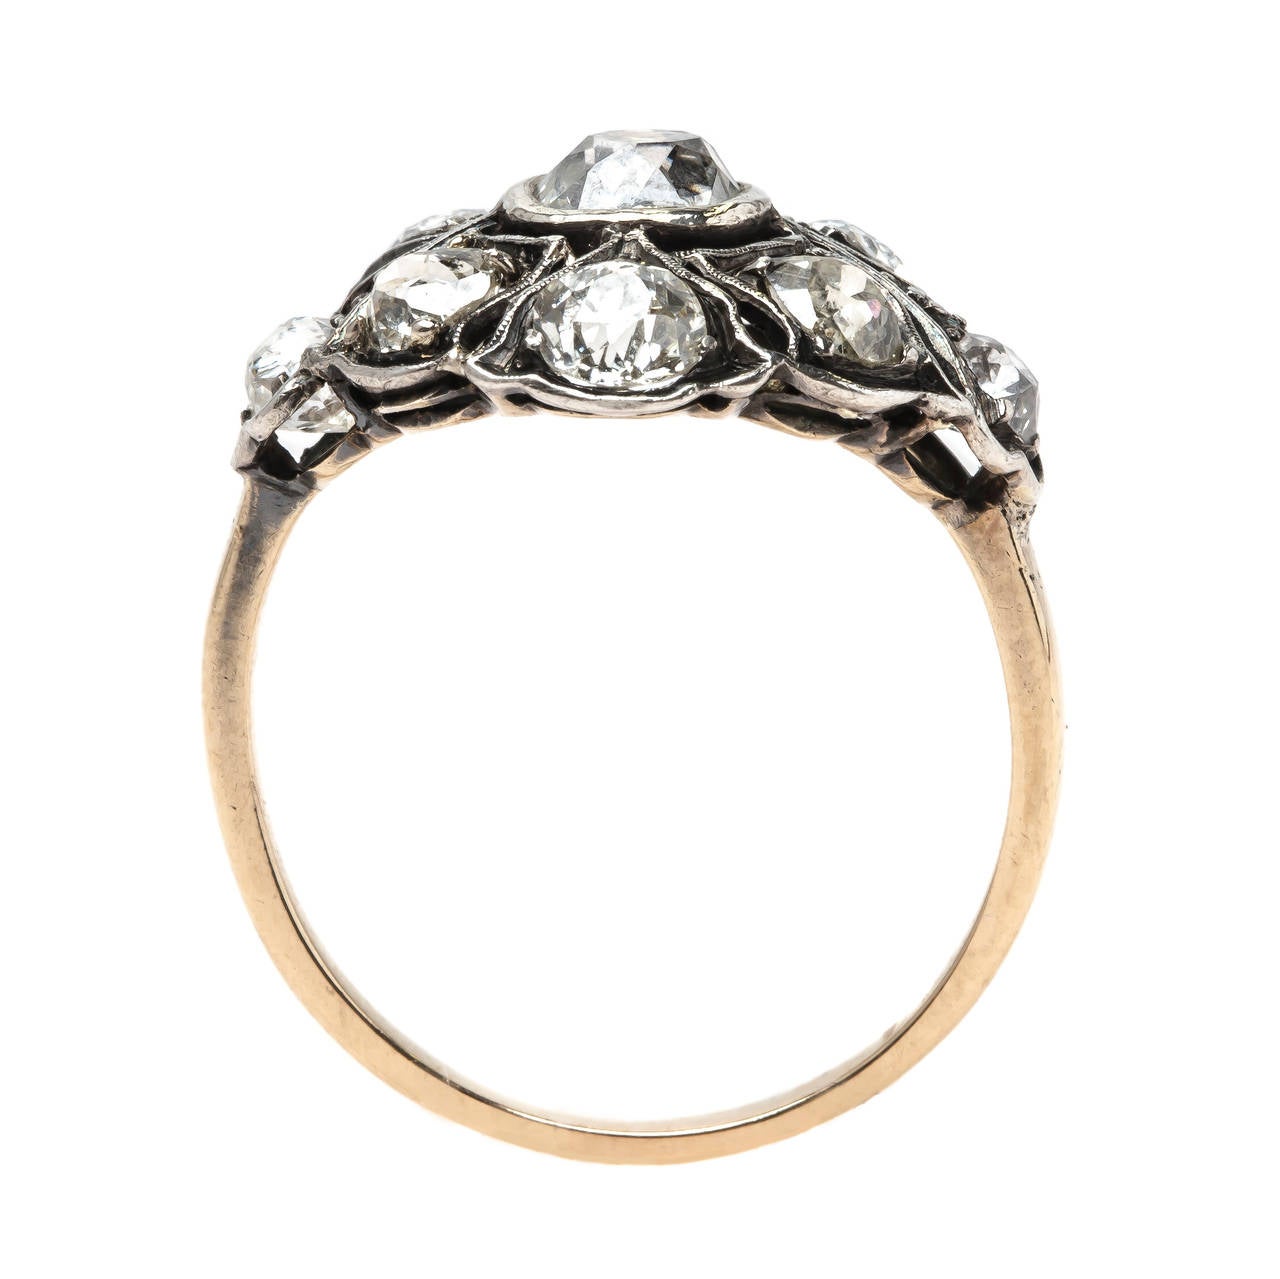 Broken Arrow is an incredible Victorian era (circa 1880) silver topped 14k yellow gold ring. Our gemology team believes it was originally a brooch that was converted into this stunning ring during the 1940's. This impeccable bombe style cluster ring